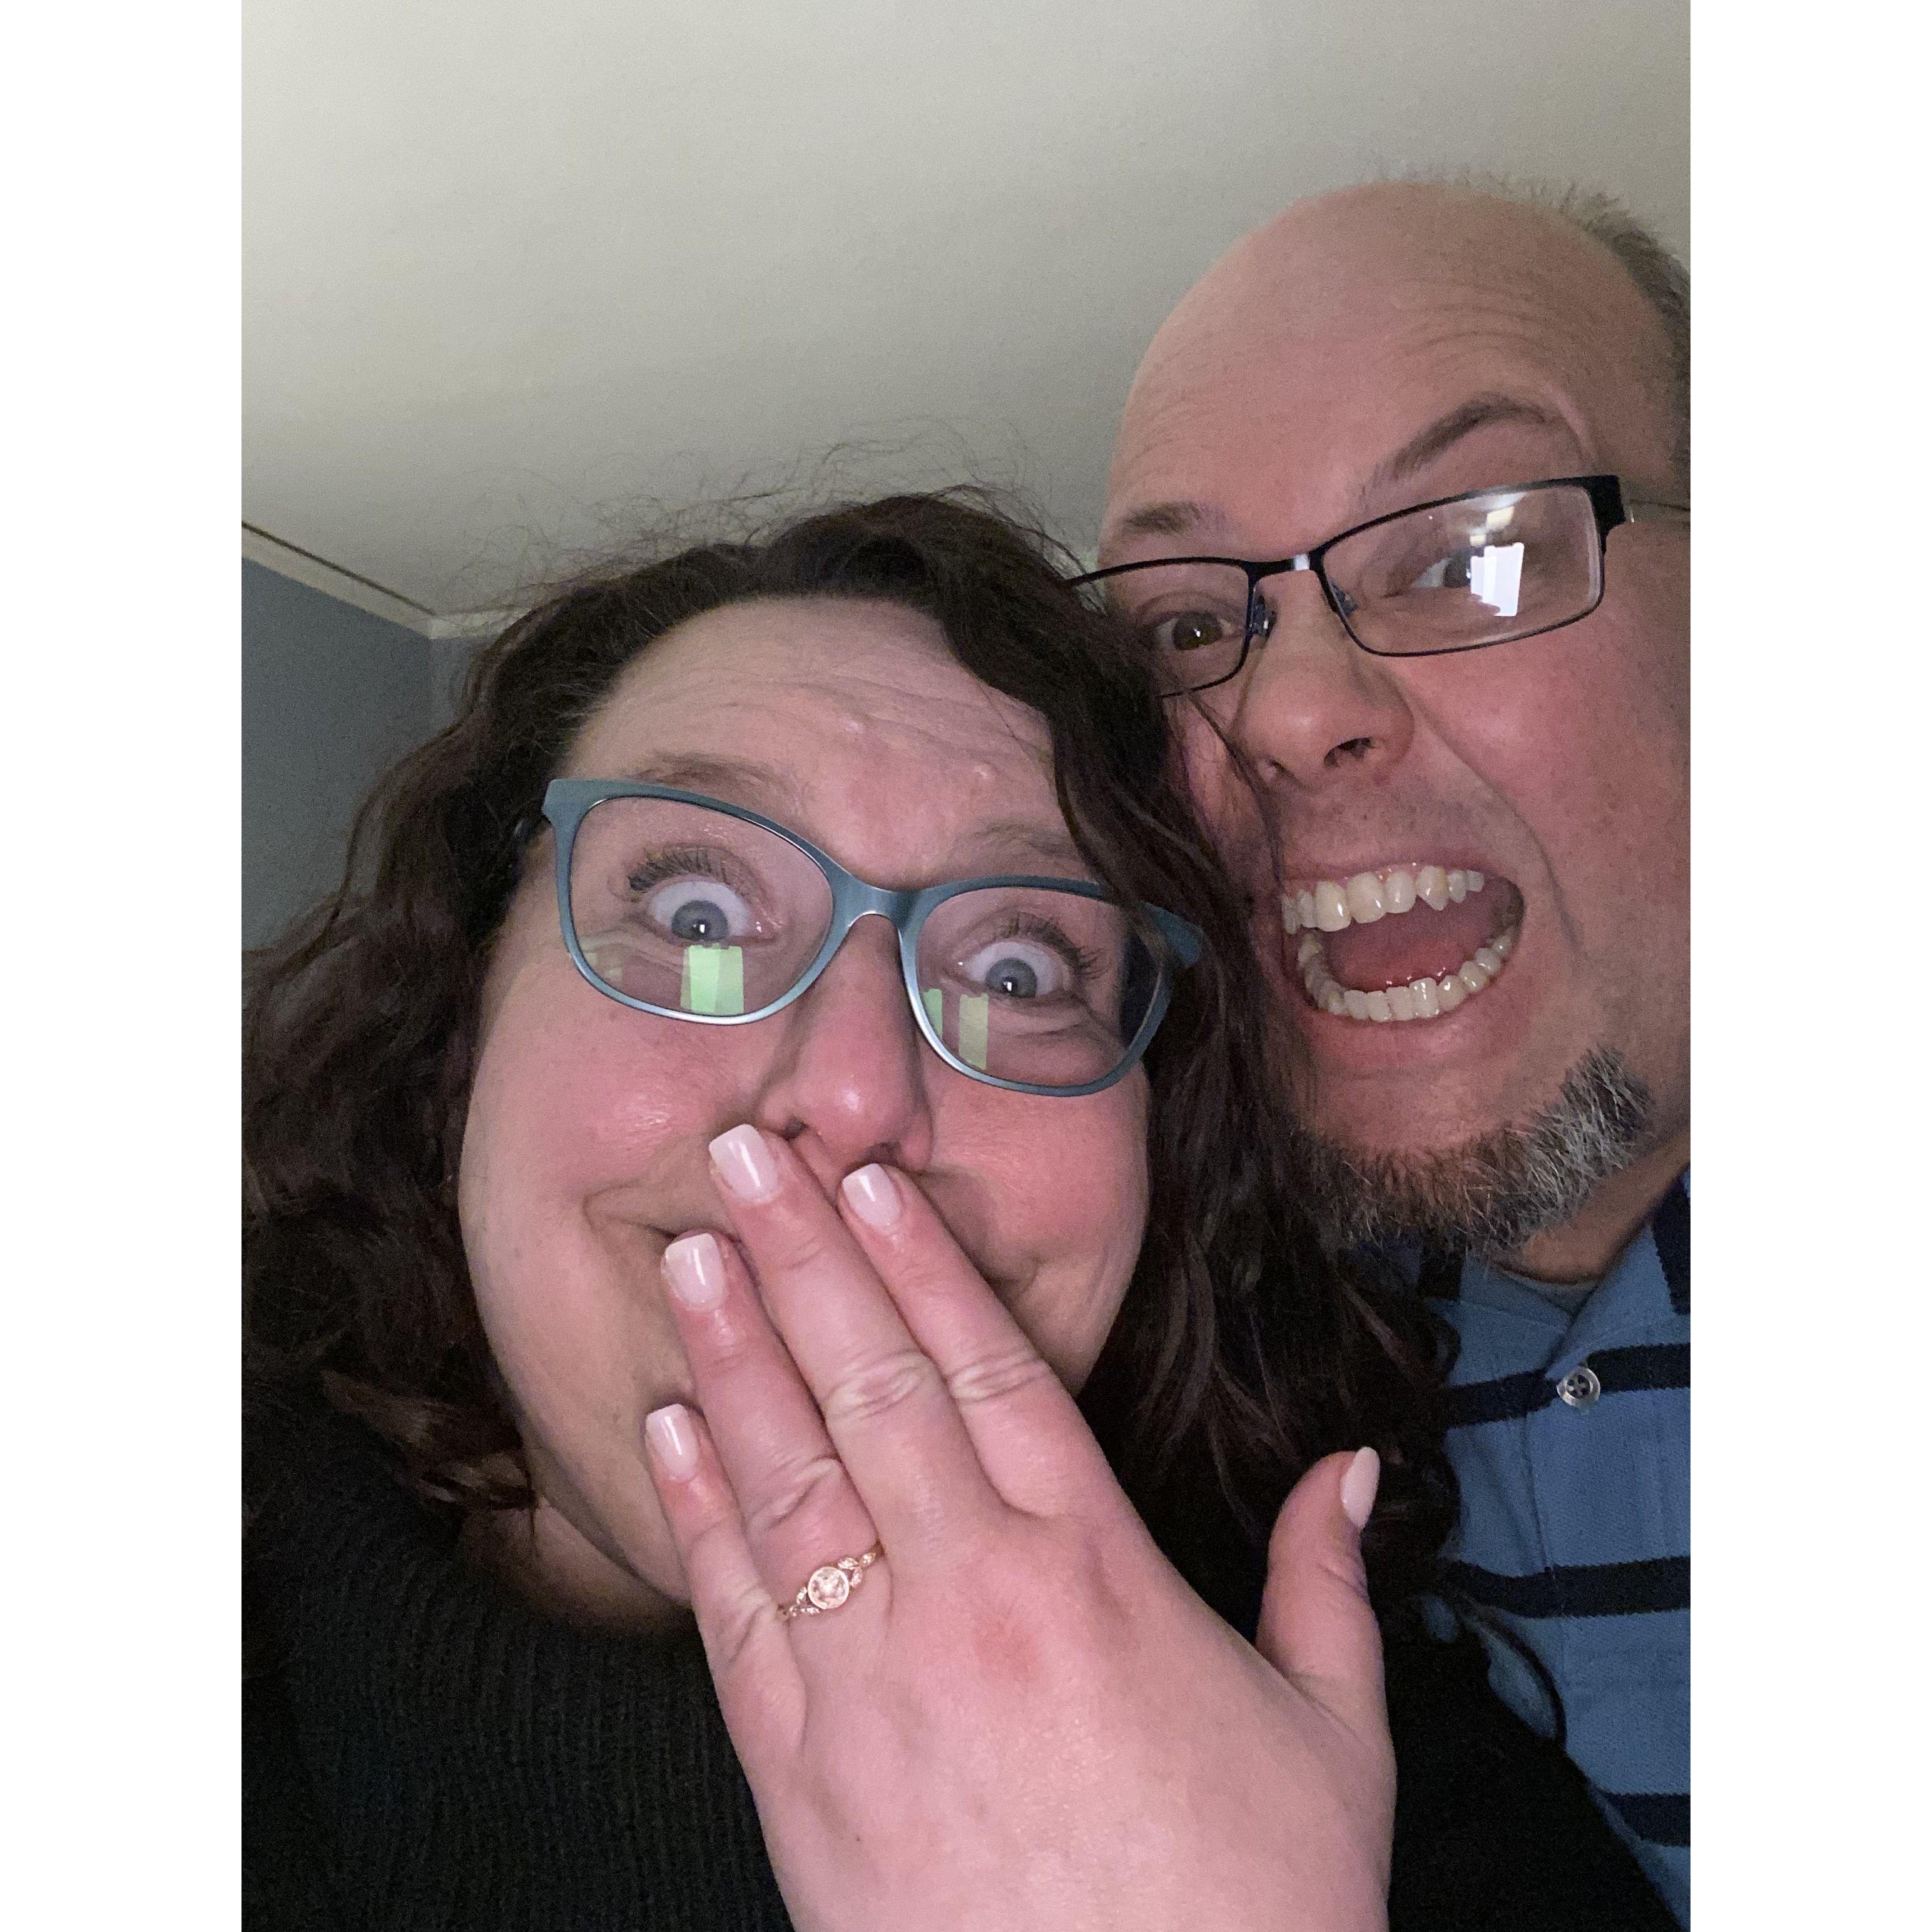 We're Engaged!